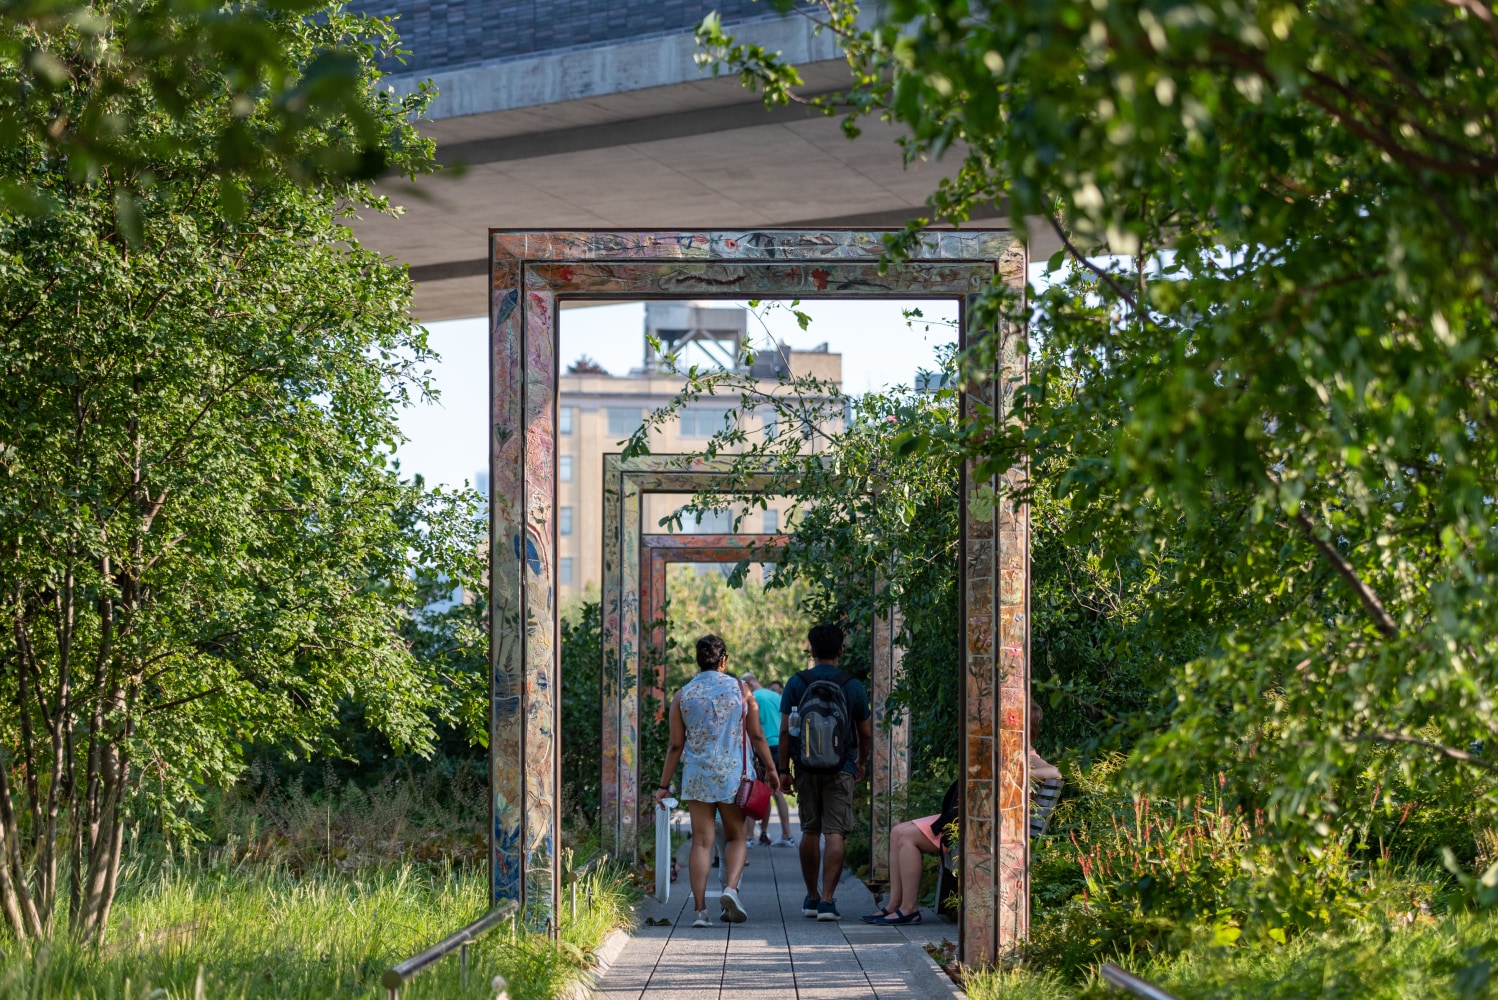 Sam Falls,&amp;nbsp;Untitled (Four Arches), 2019. Part of&amp;nbsp;En Plein Air. A High Line Commission.

Photo by Timothy Schenck. Courtesy of the High Line.

&amp;nbsp;

INQUIRE